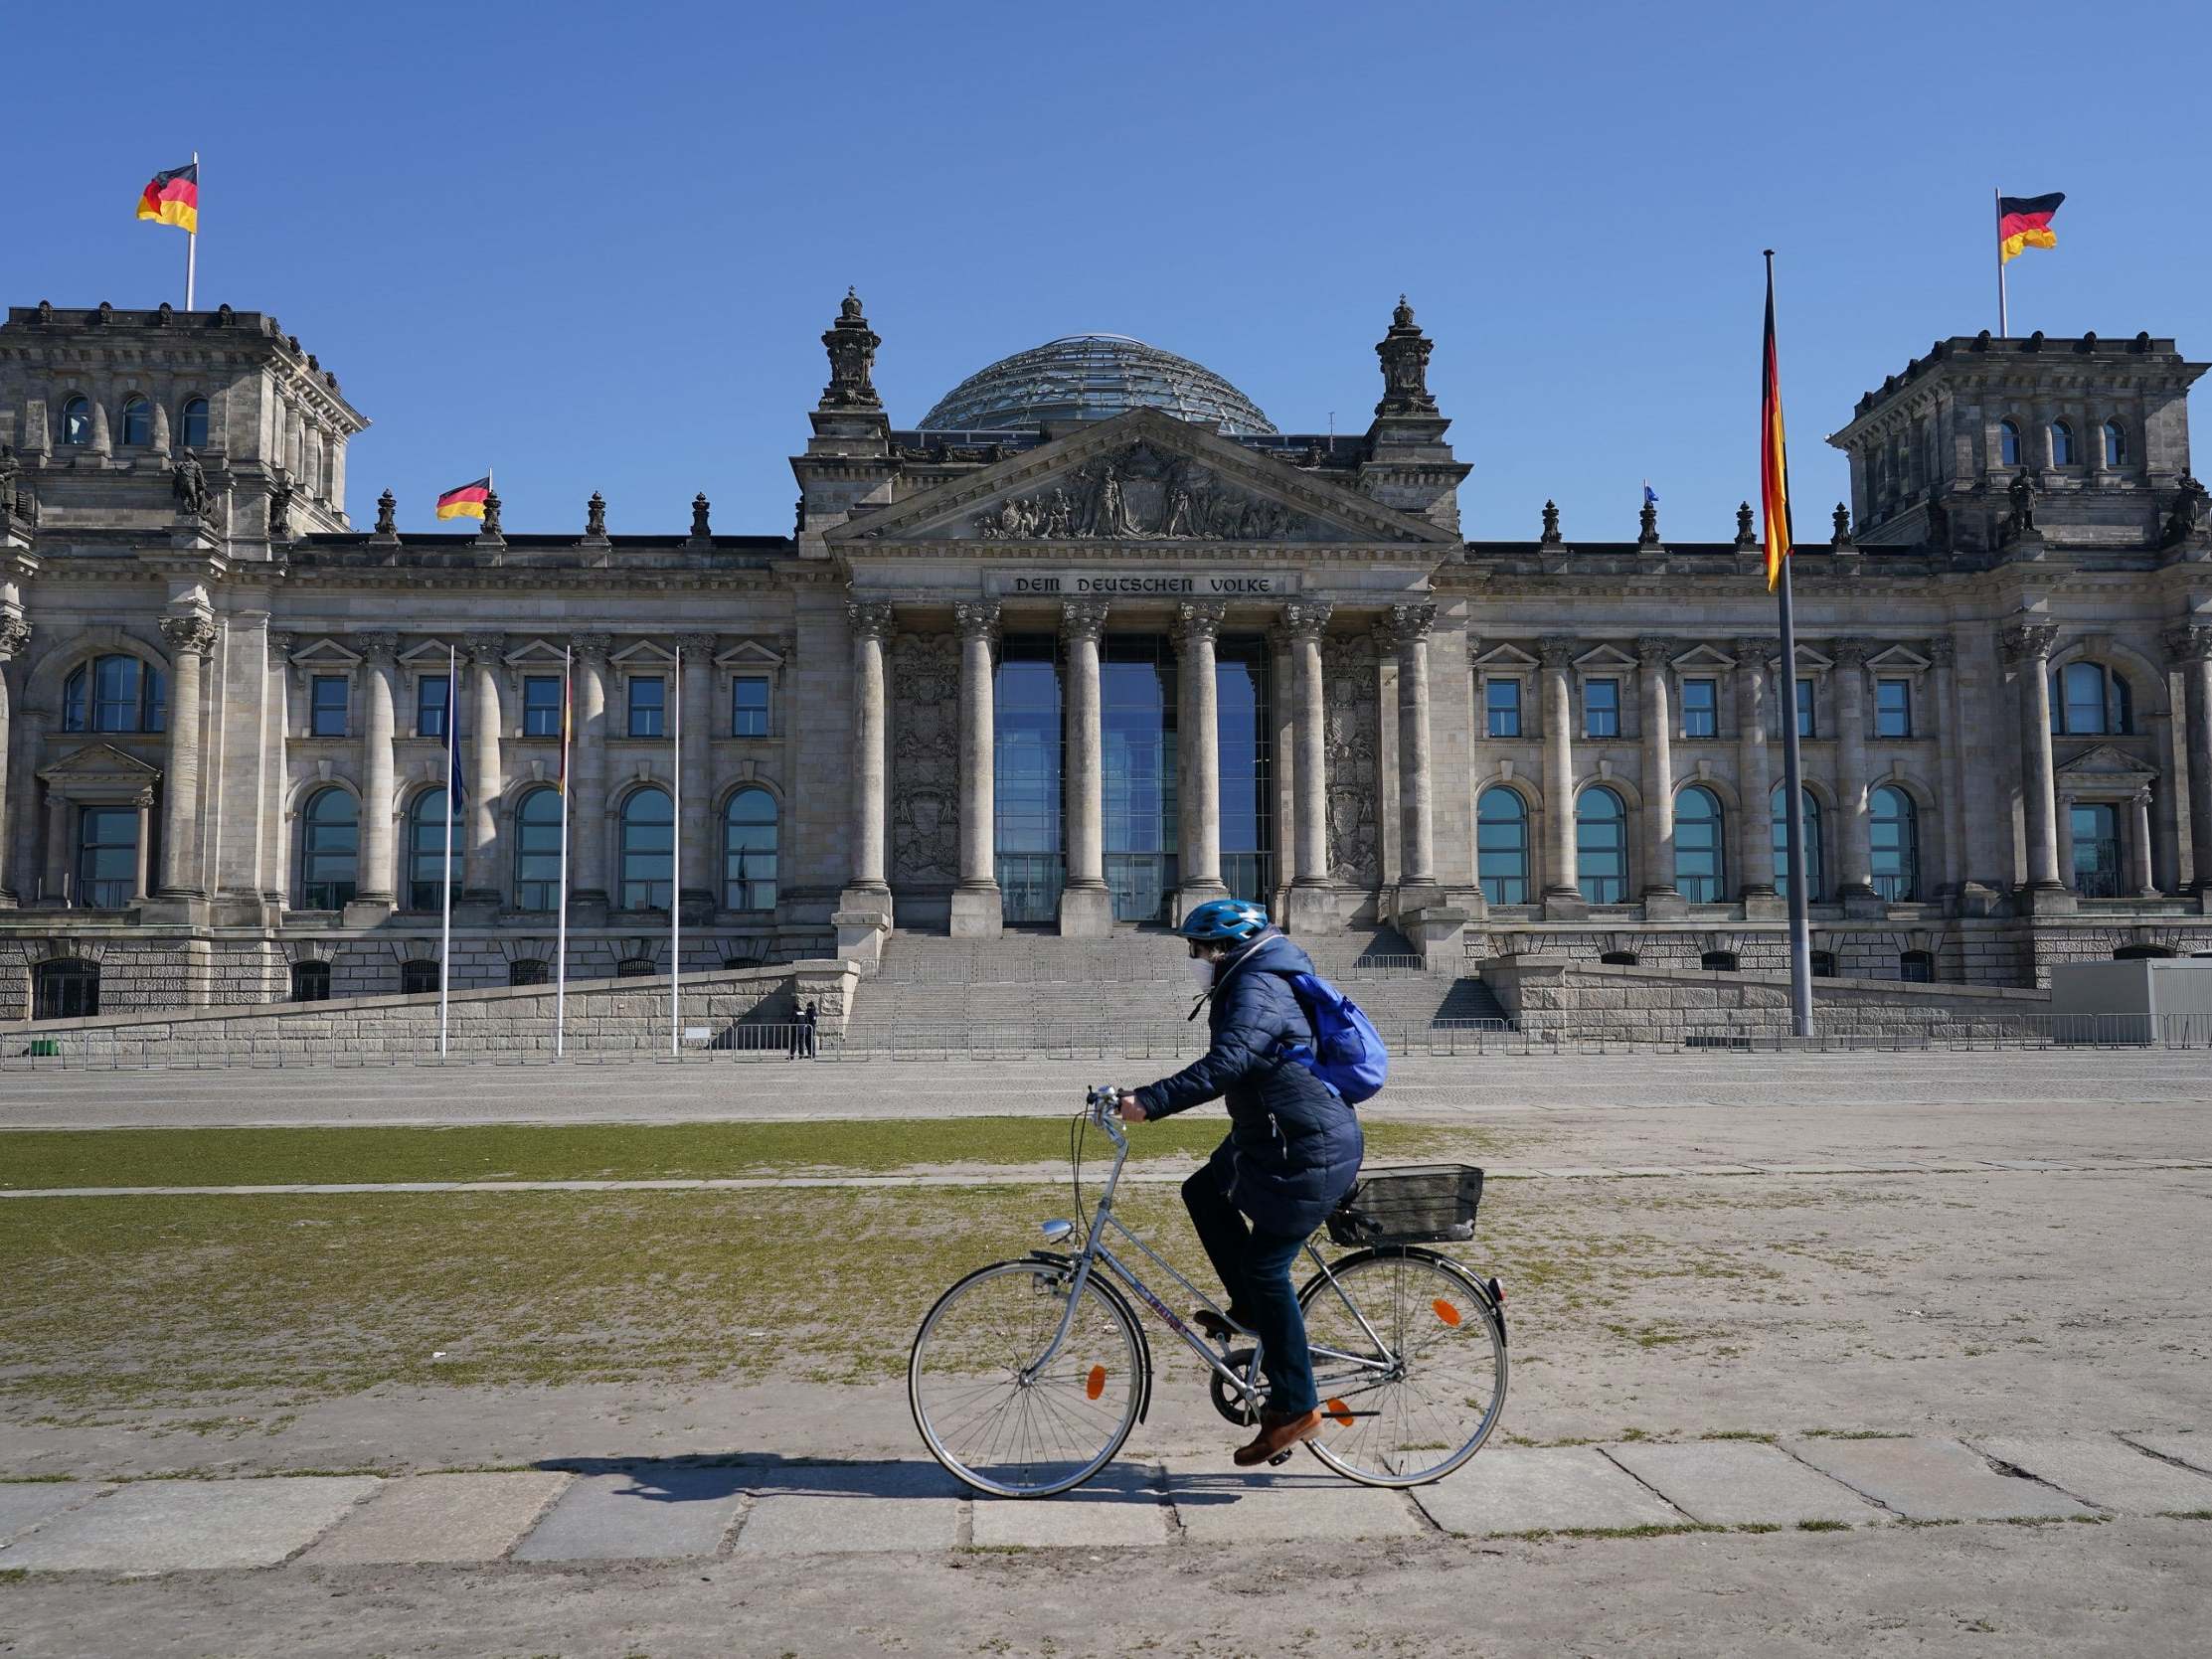 A woman wearing a protective mask rides a bicycle past the Reichstag